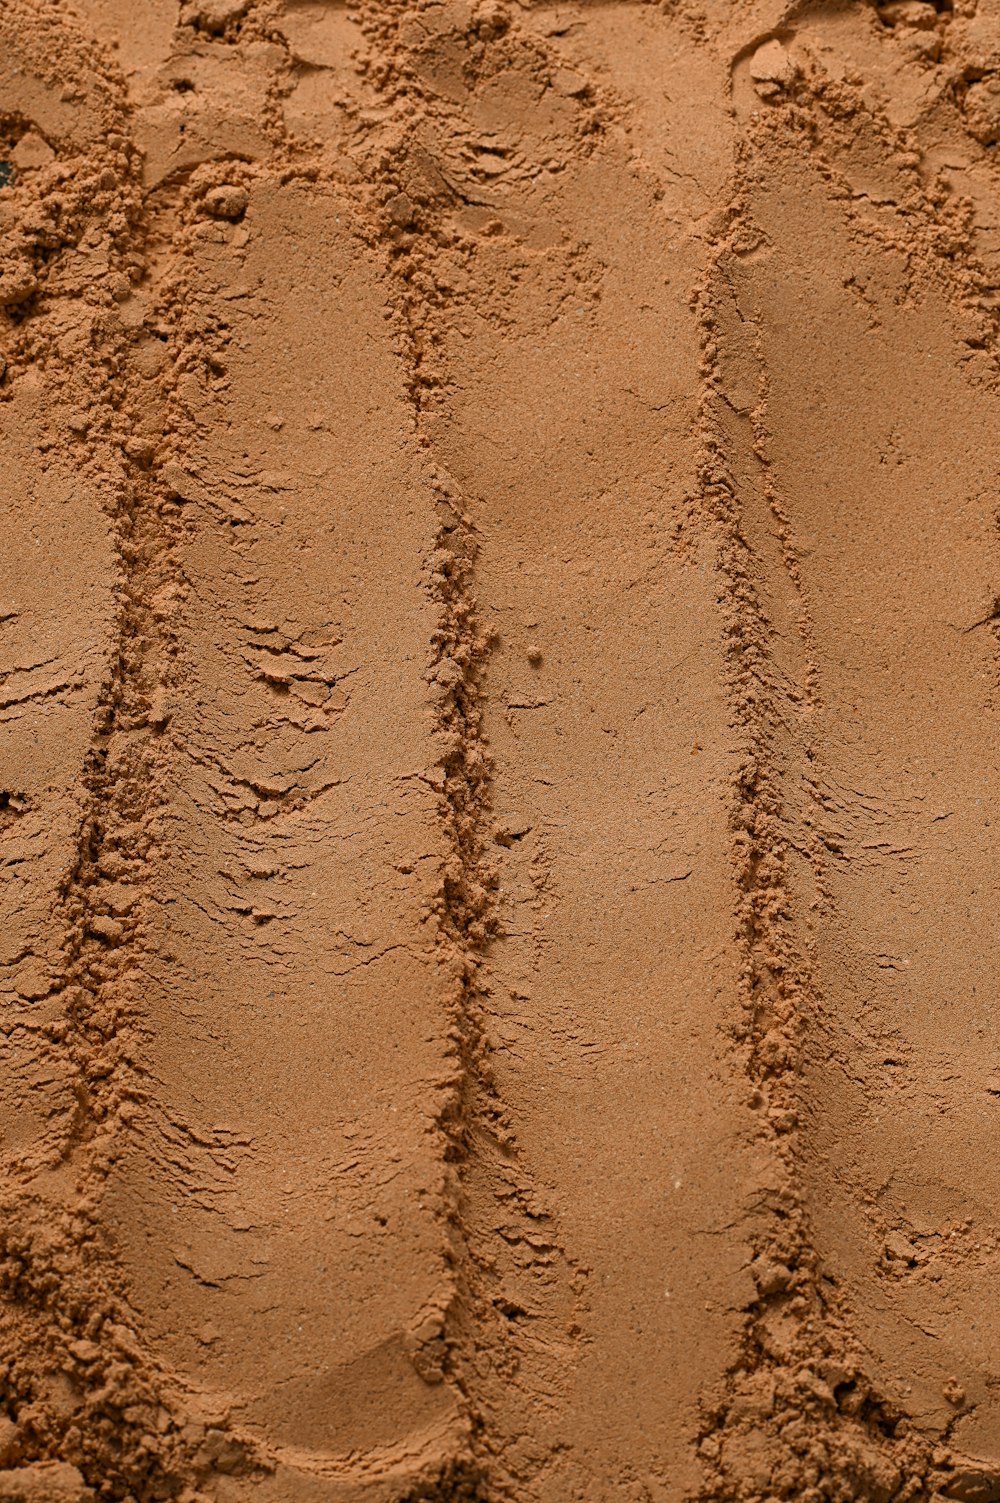 a close up of a sandy beach with tracks in the sand